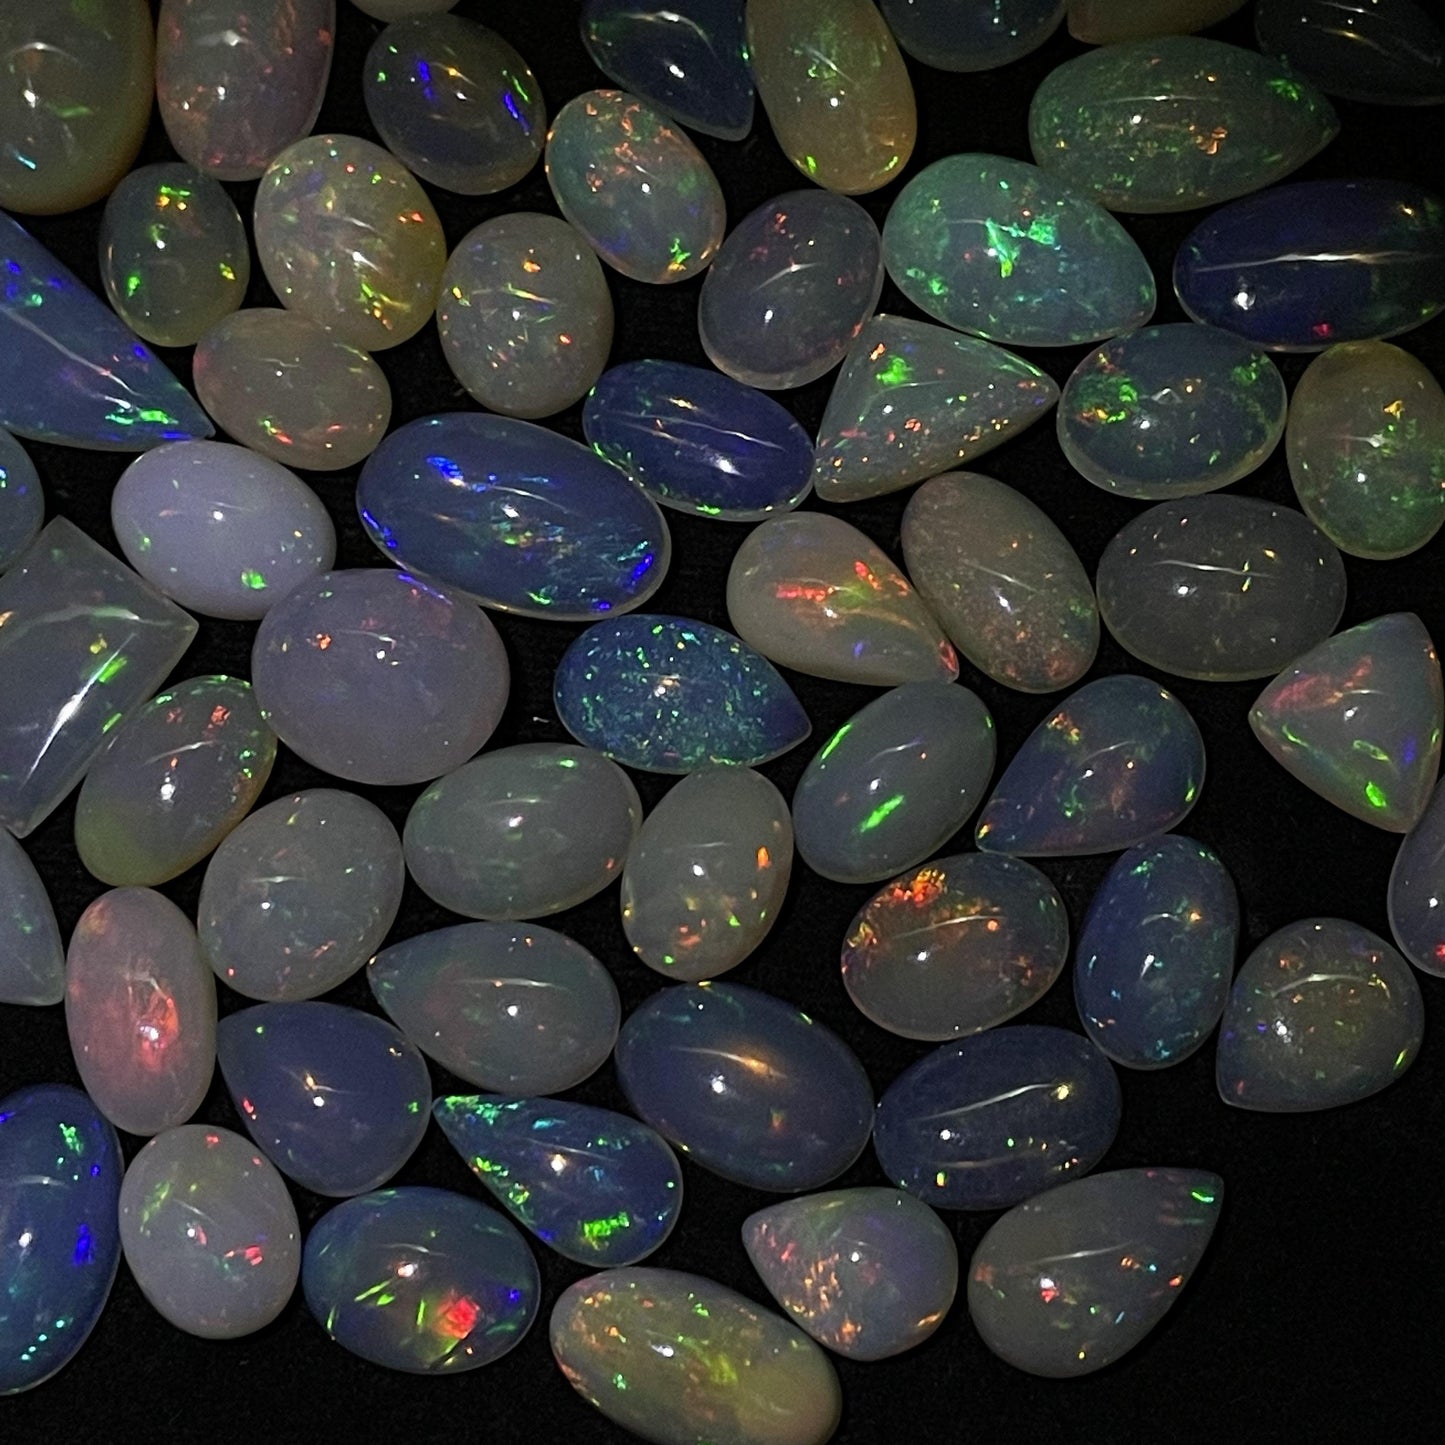 Ethereal Beauty Unveiled: Natural Ethiopian Opal Cabochon - Captivating 5 cts of Exquisite Splendor